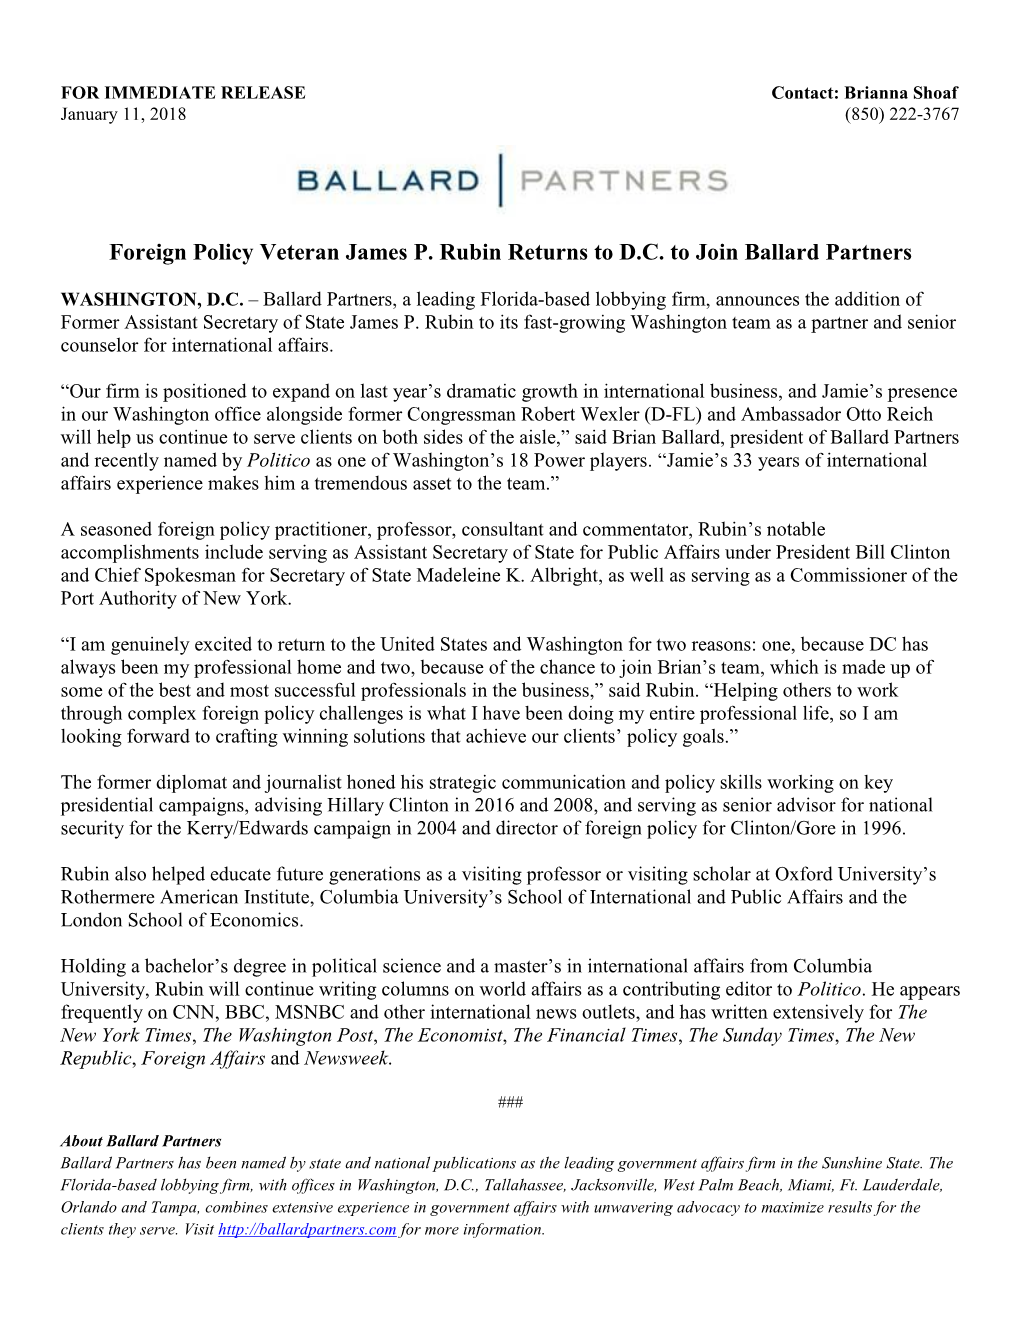 Foreign Policy Veteran James P. Rubin Returns to D.C. to Join Ballard Partners